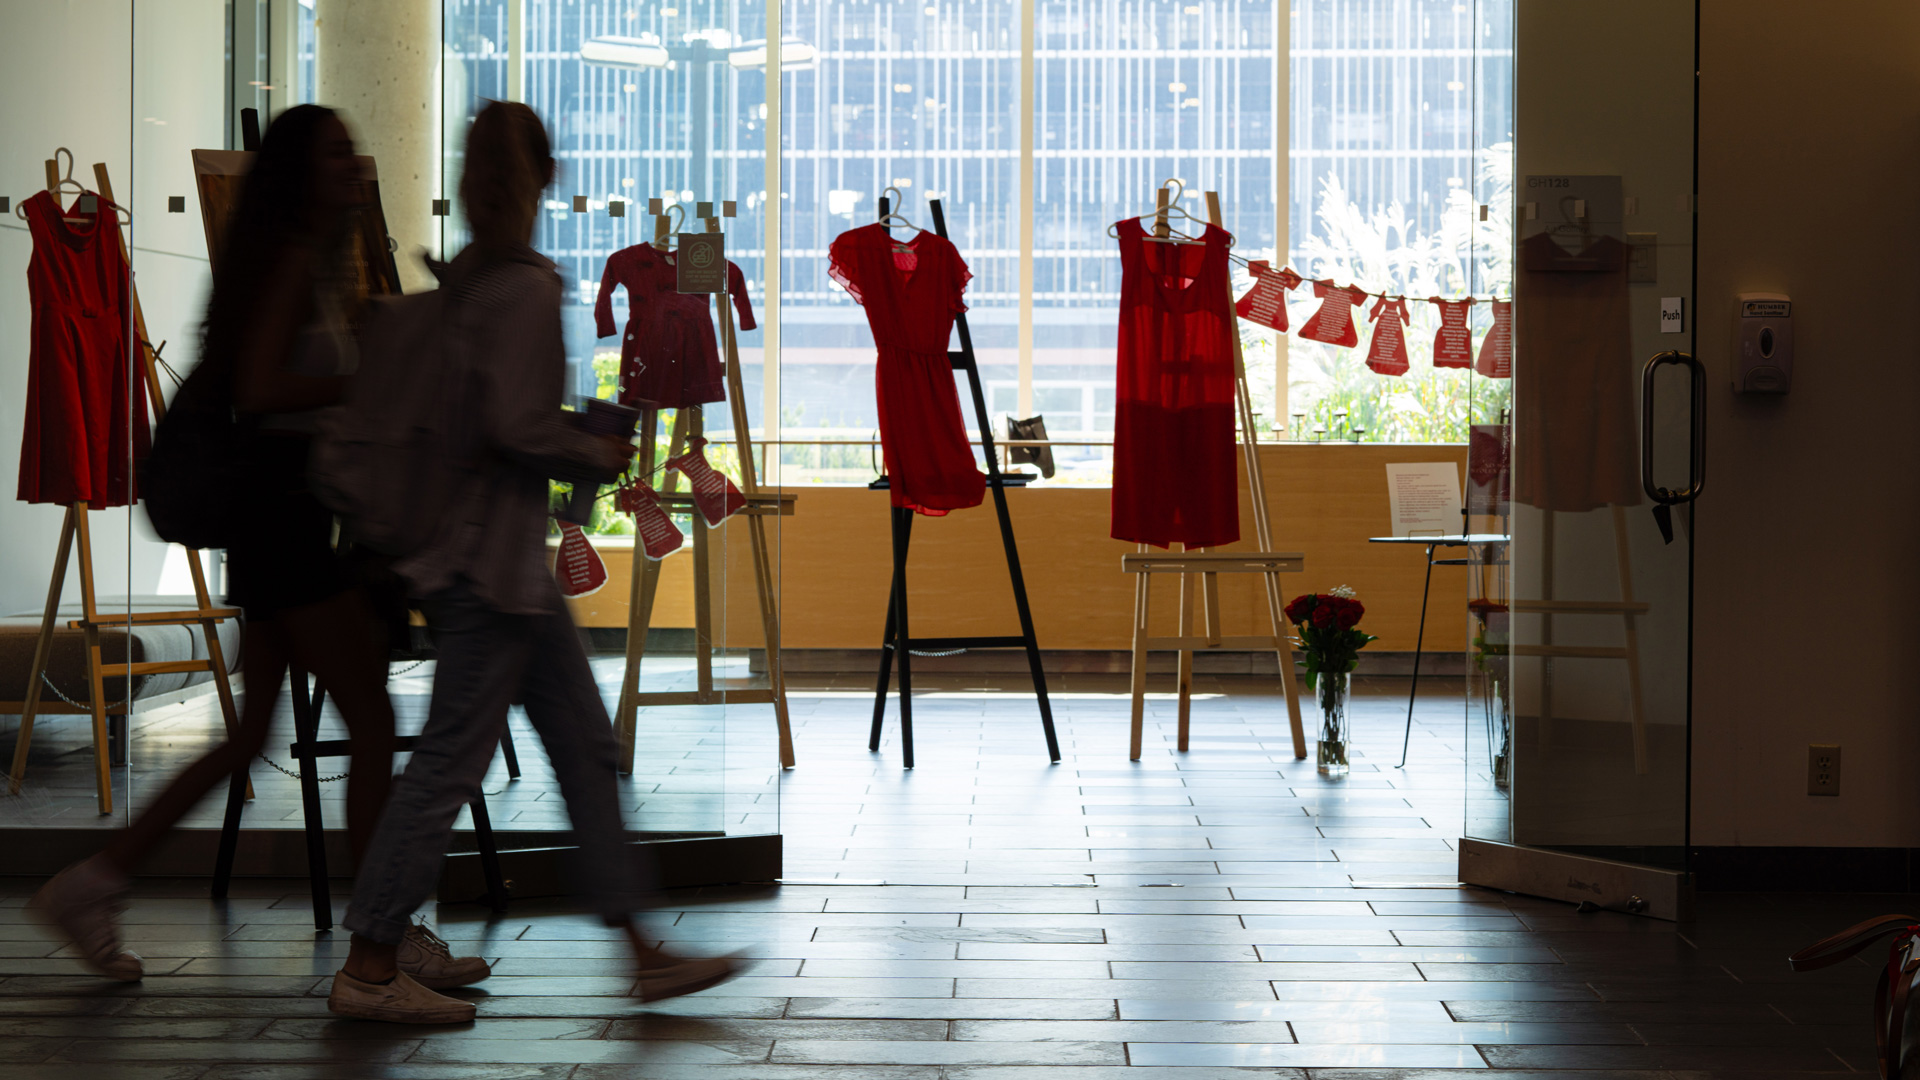 Two students walking by a display of red dresses on easels 